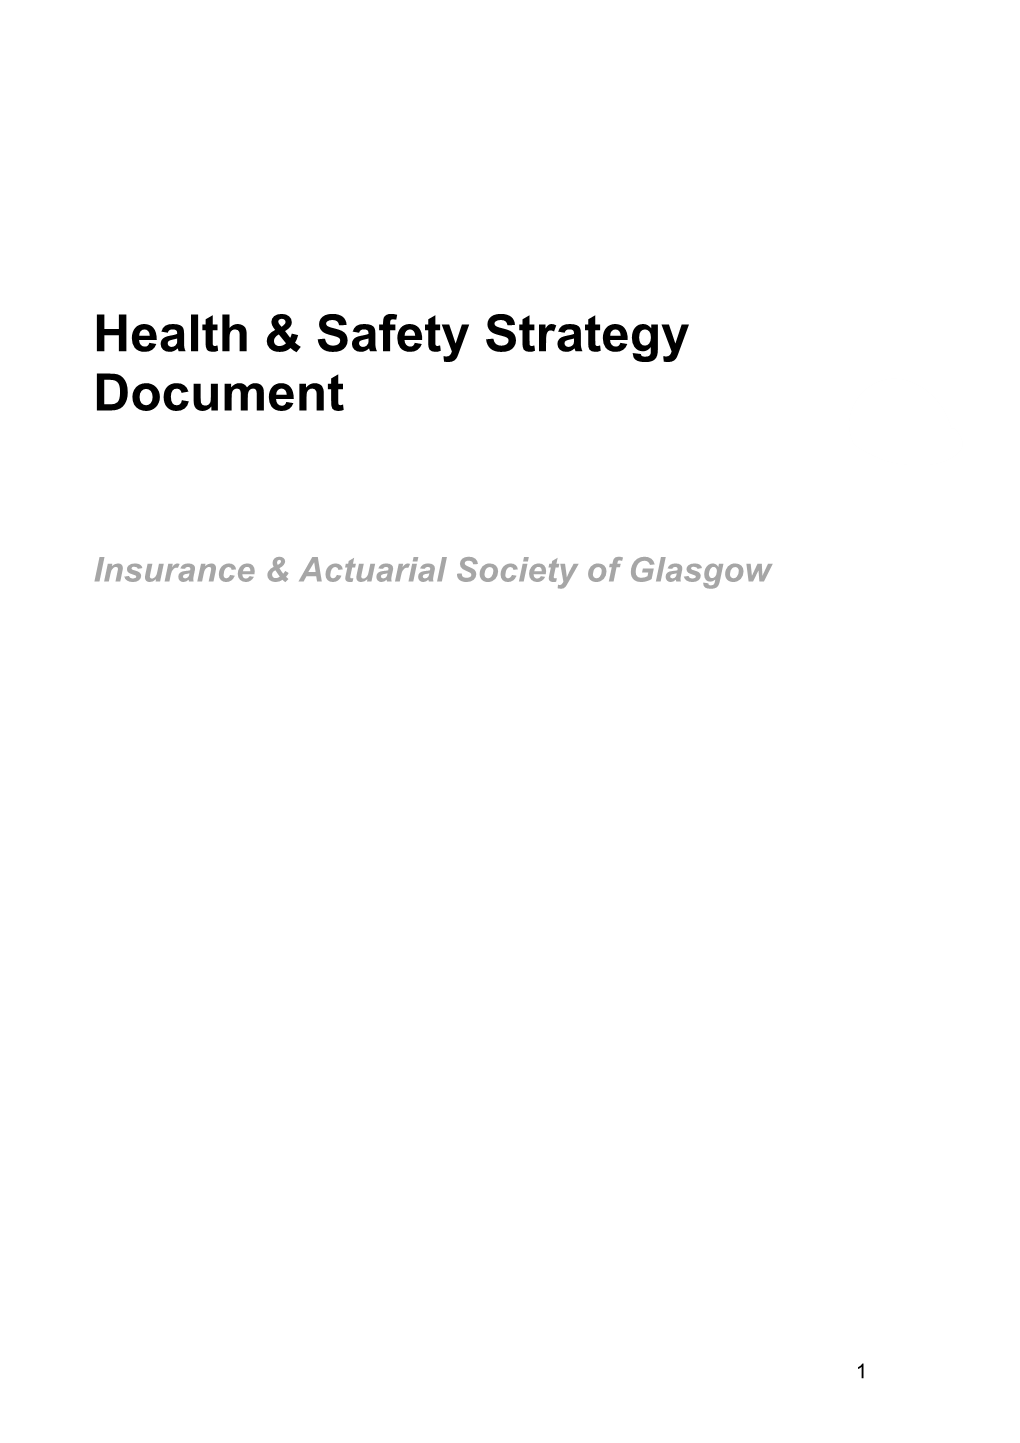 Insurance & Actuarial Society of Glasgow